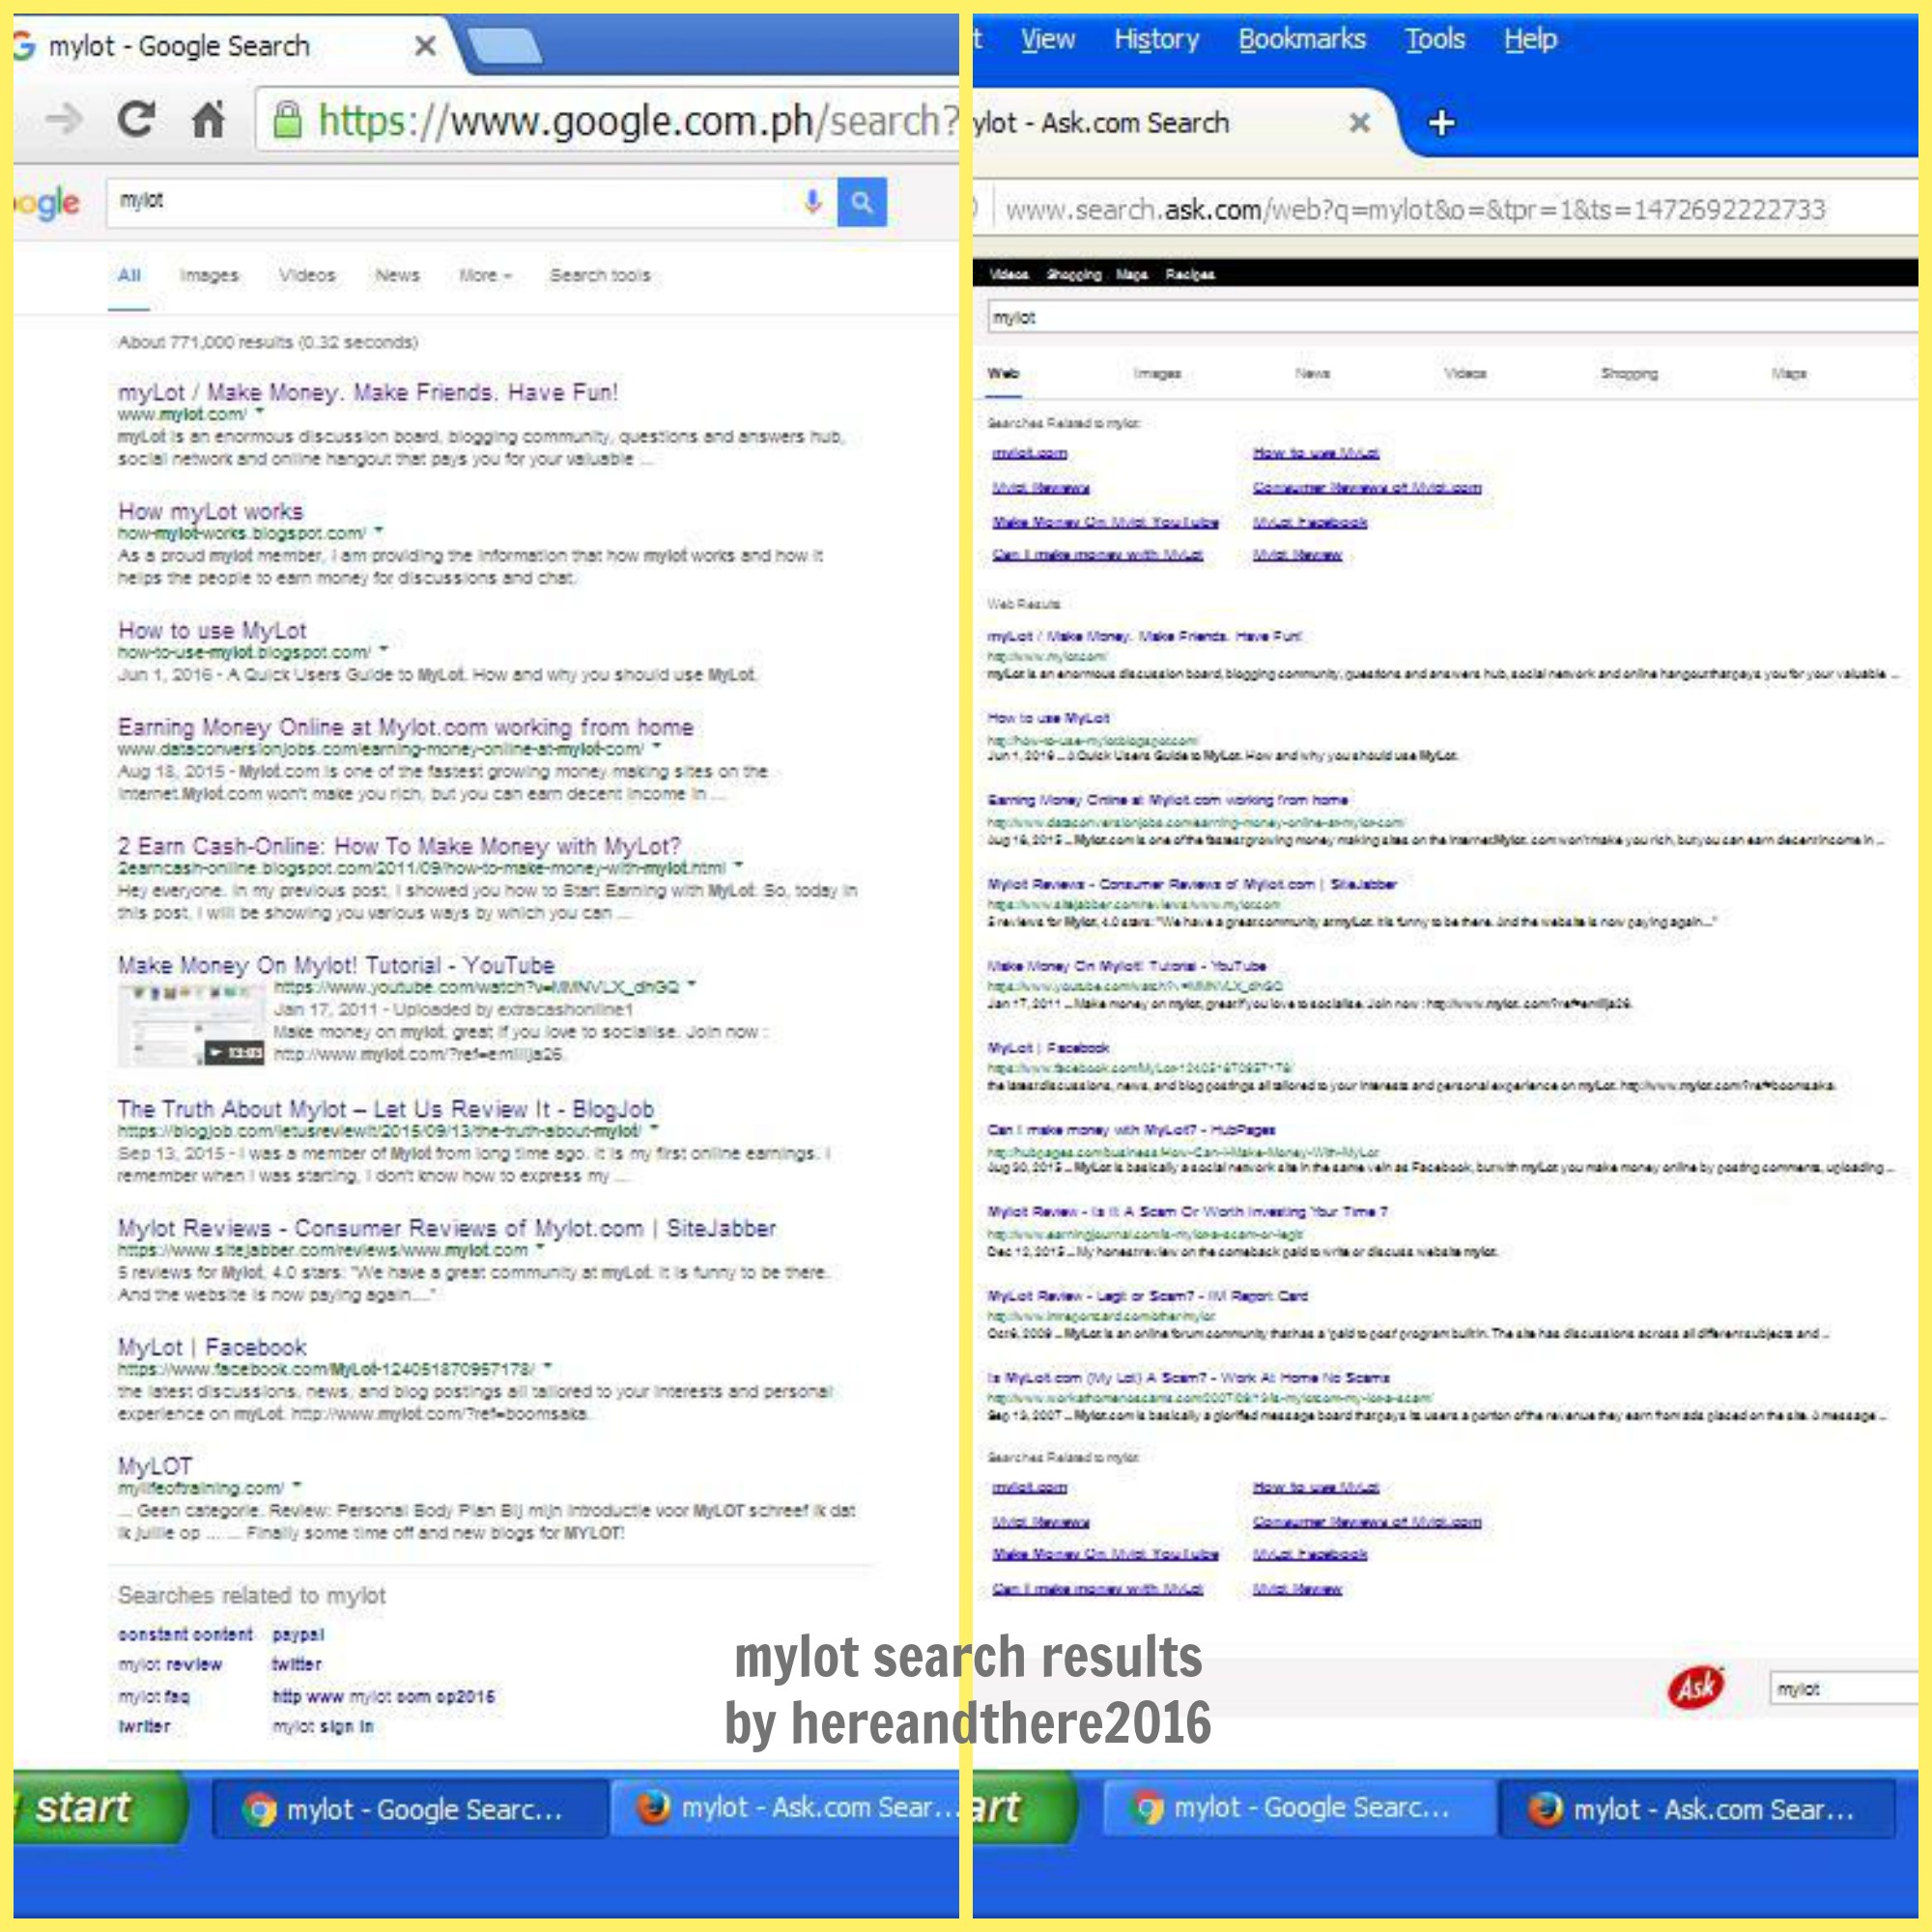 Mylot search results by hereandthere2016